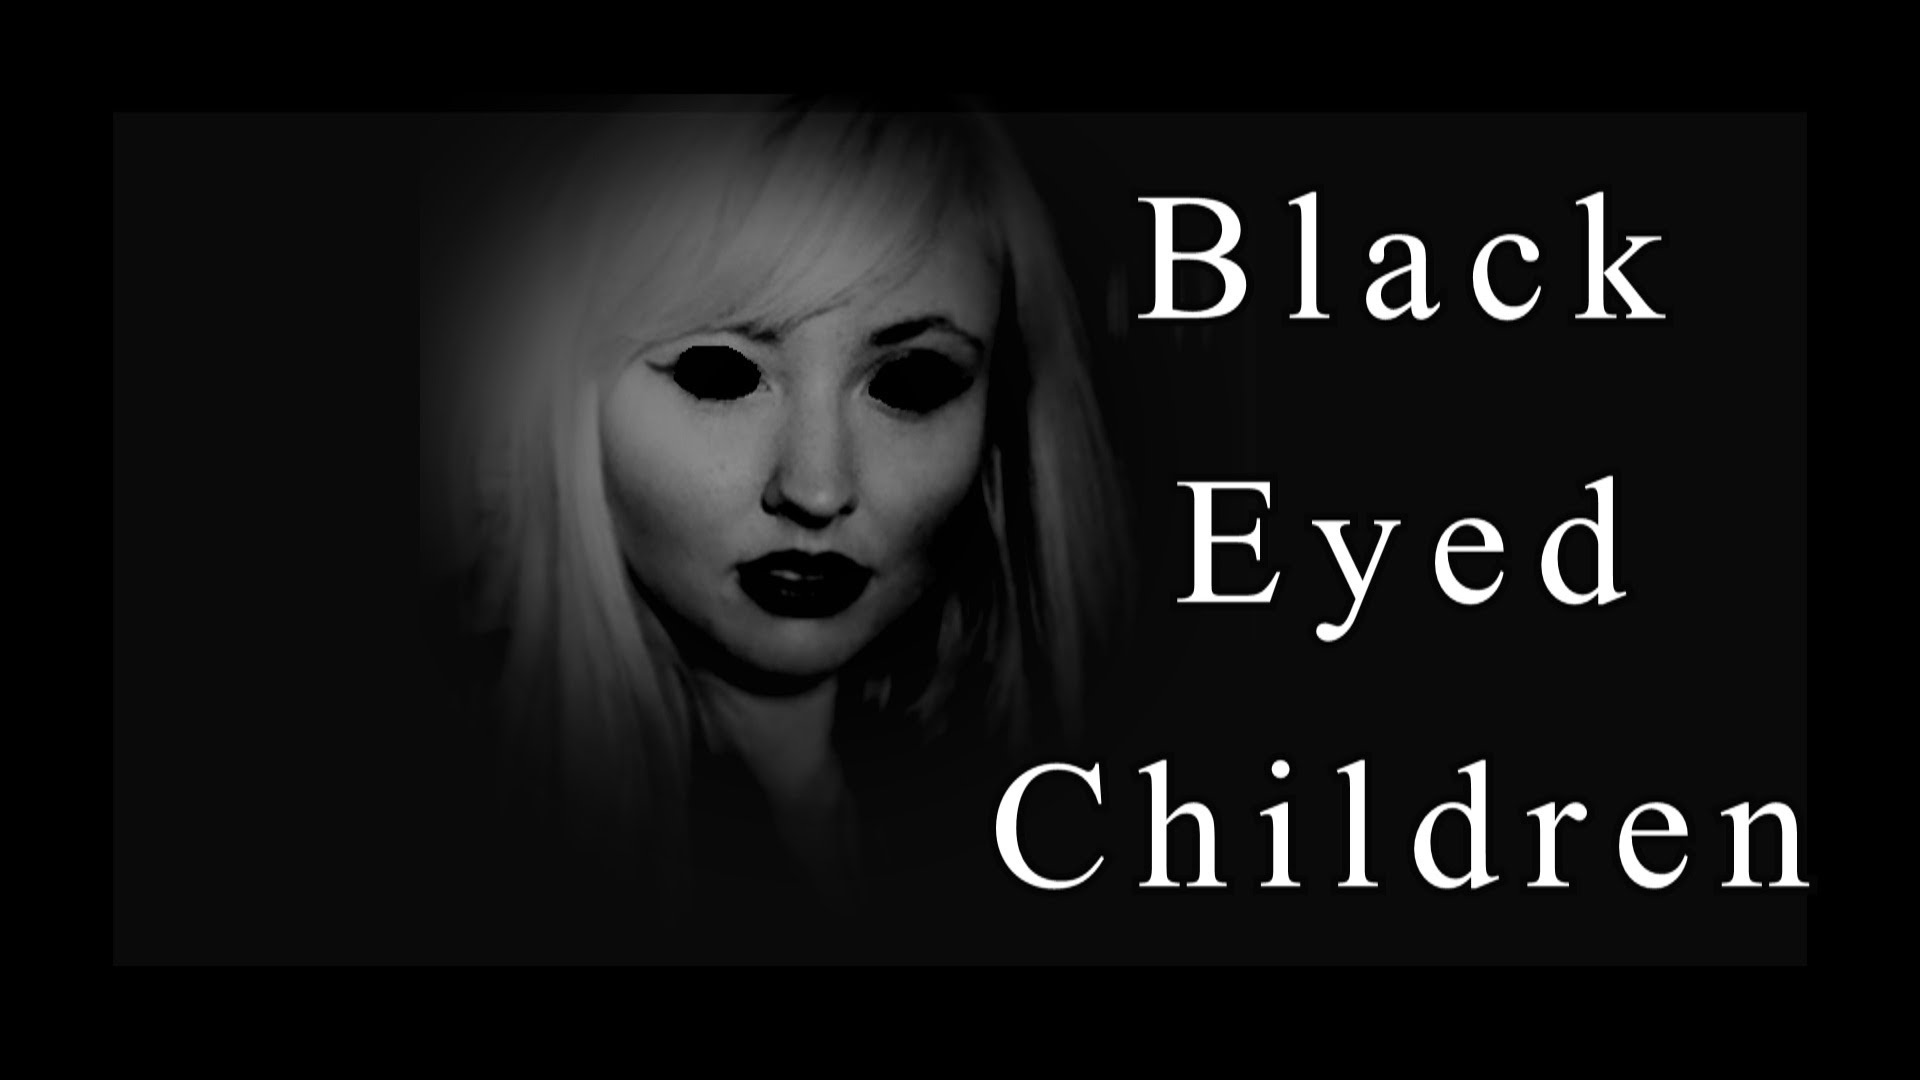 Black Eyed Children: Mystery, Real Photos & Stories